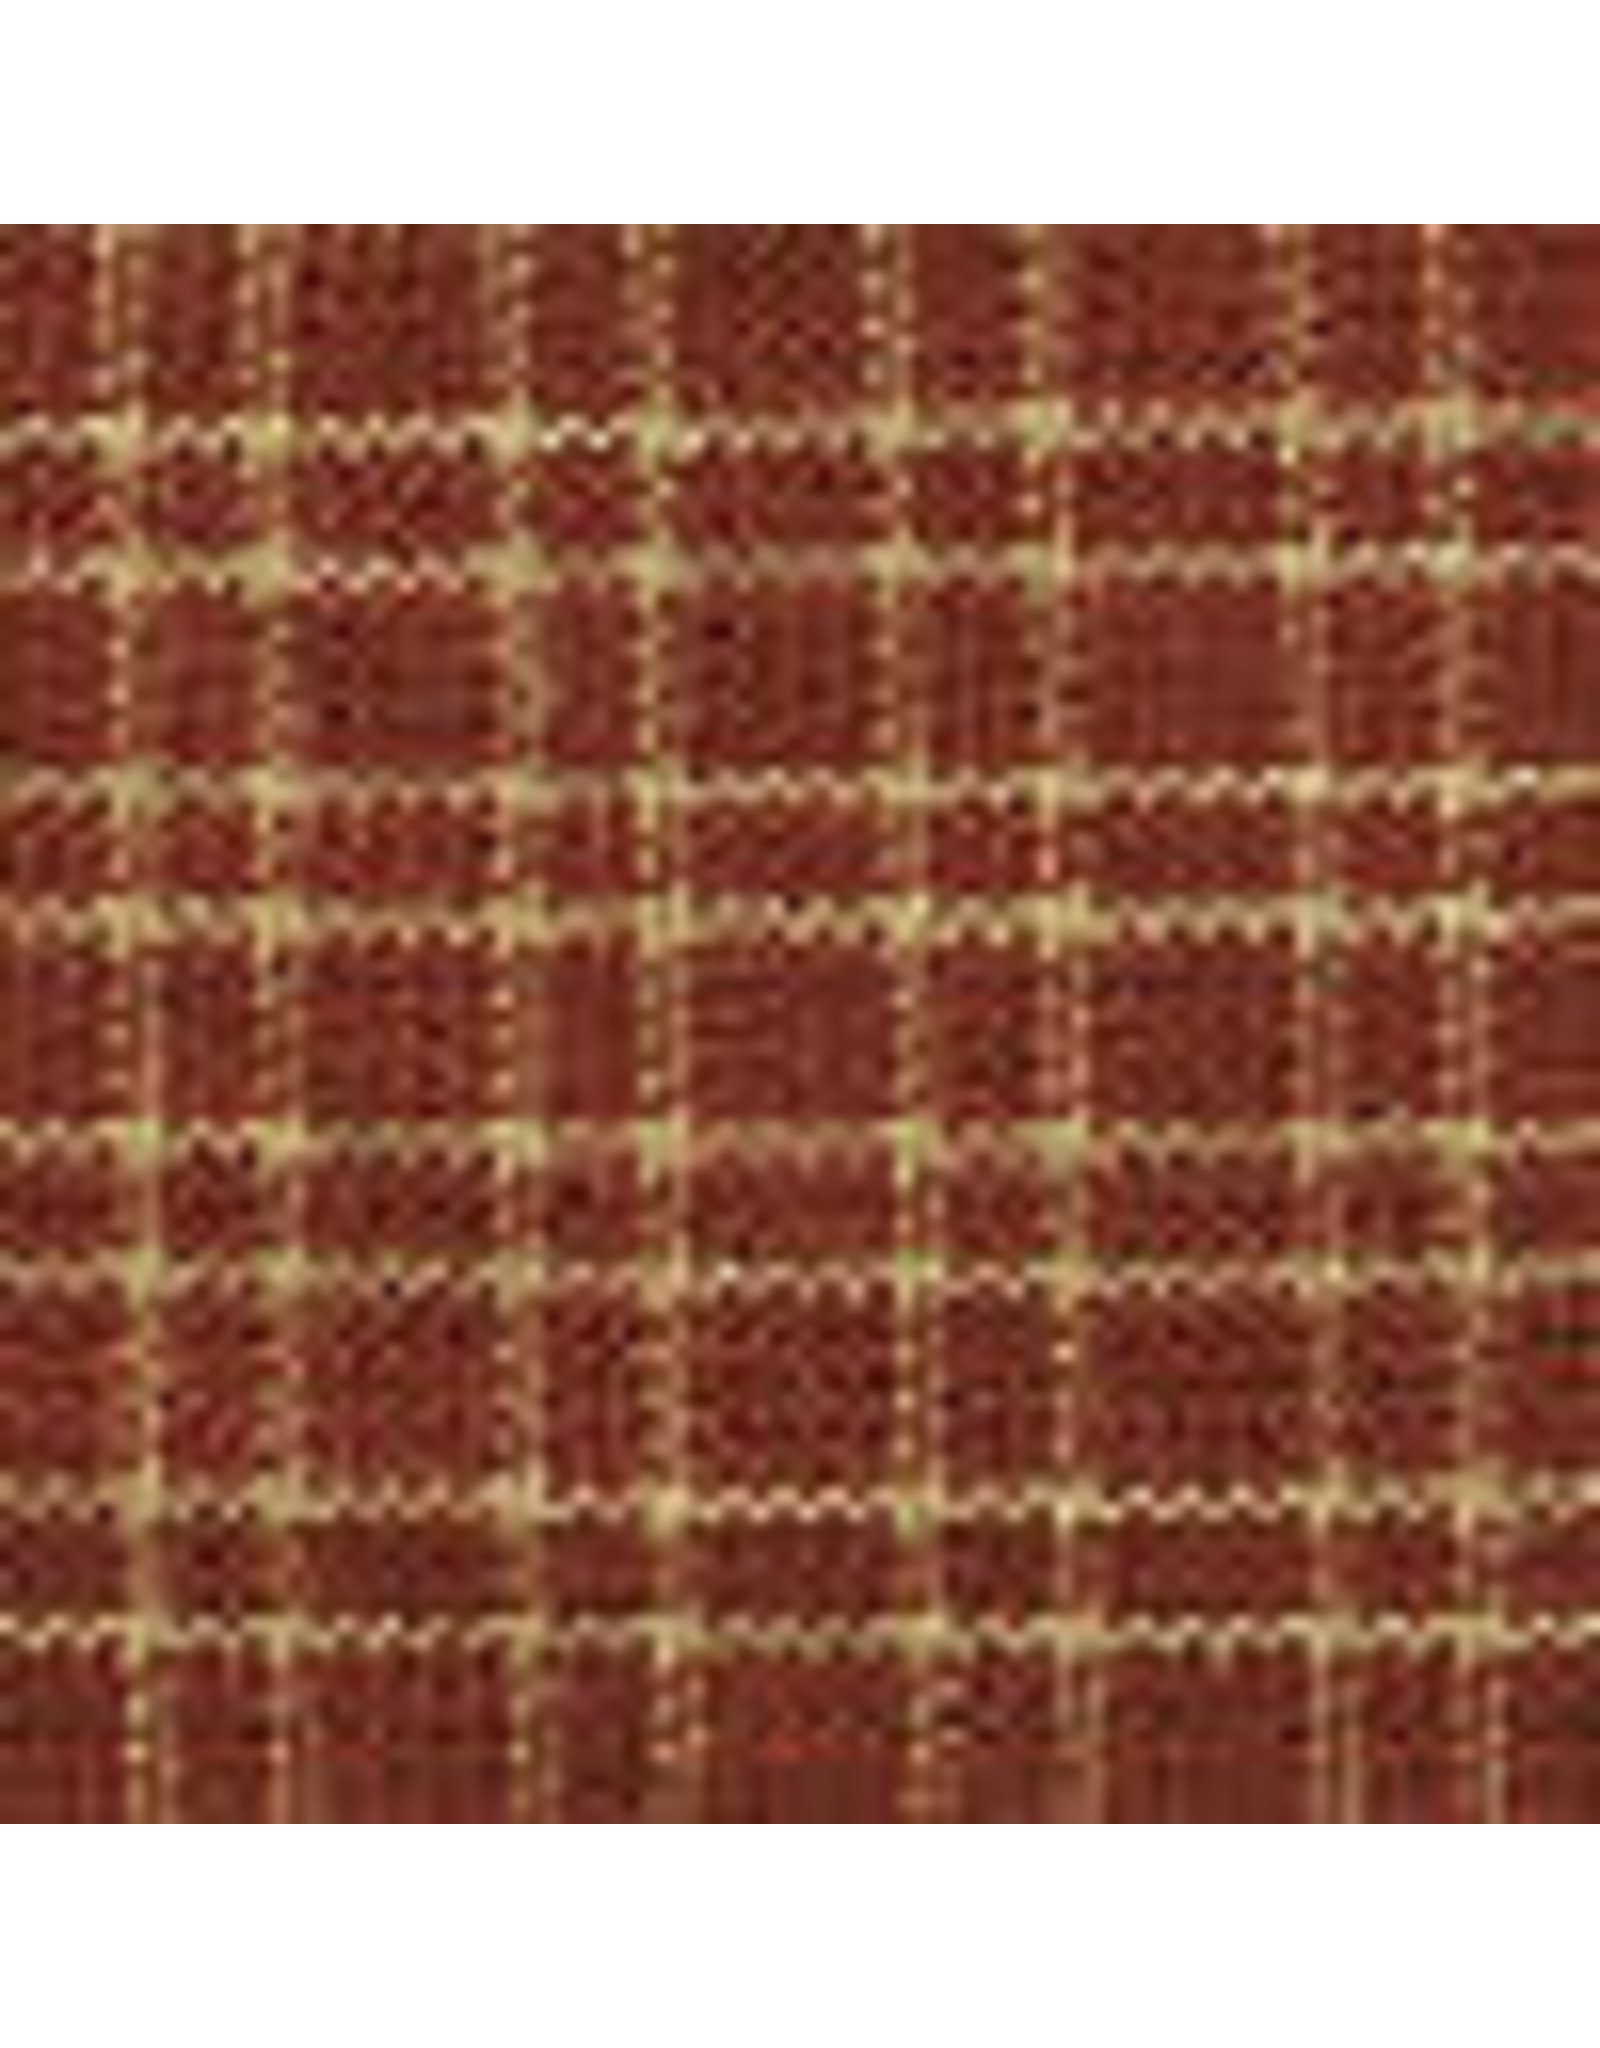 Yd. Red and Tan  Reverse Double Pane Fabric #311